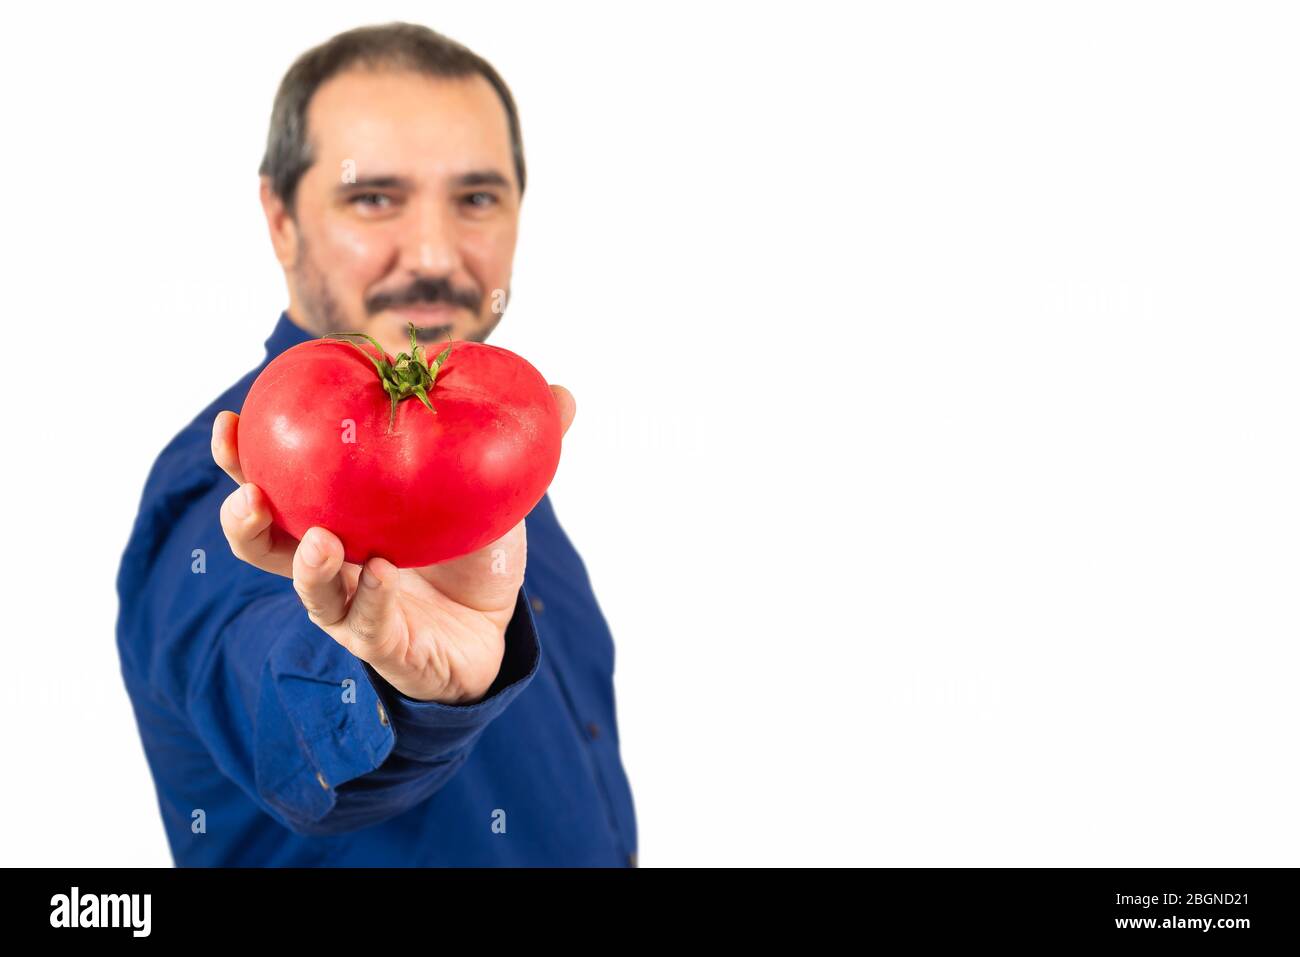 unfocused man in a blue shirt showing a tomato on camera Stock Photo